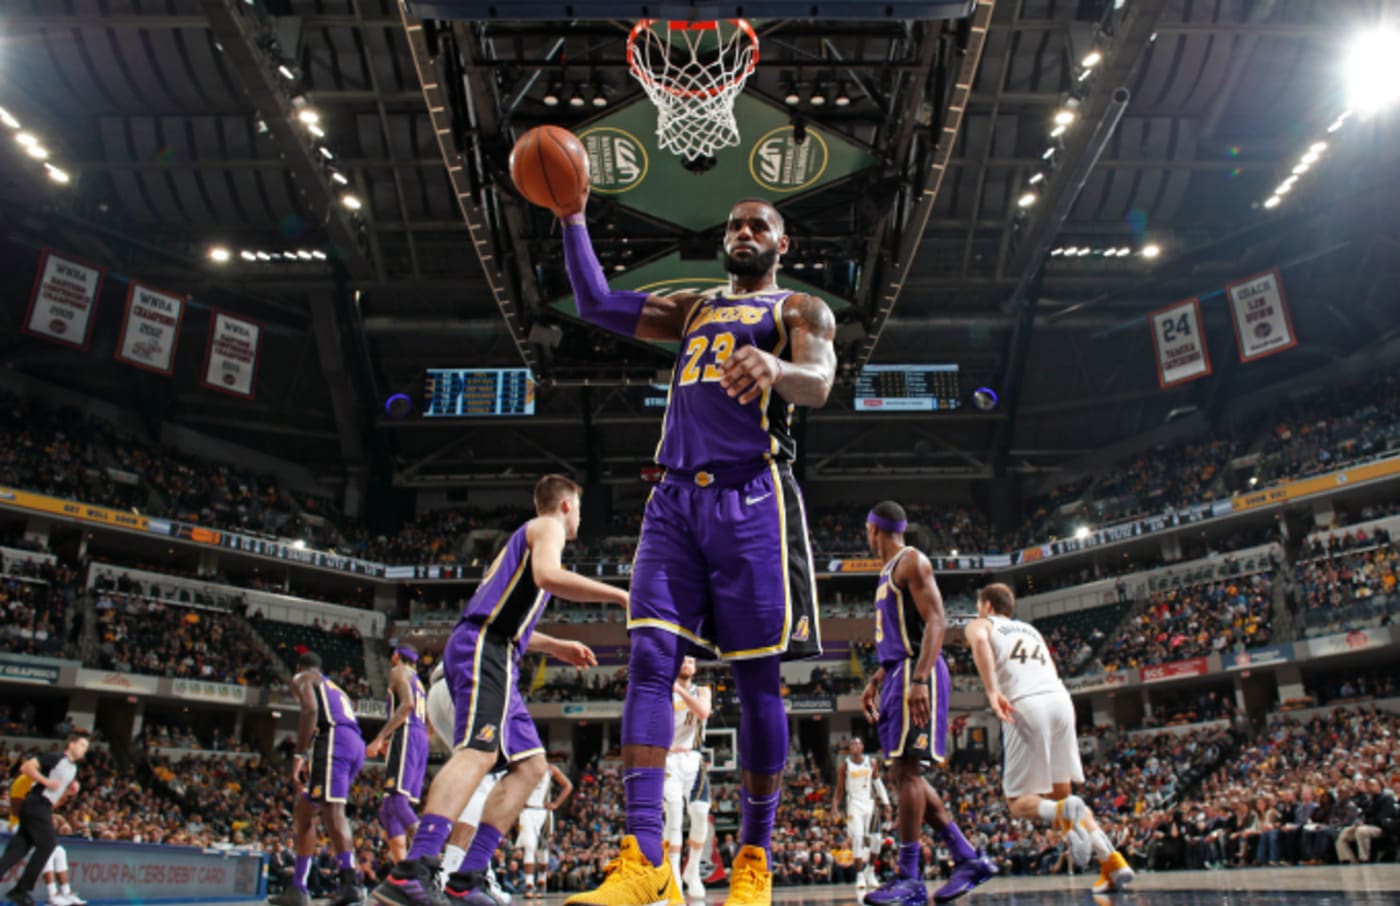 LeBron James #23 of the Los Angeles Lakers looks on during the game